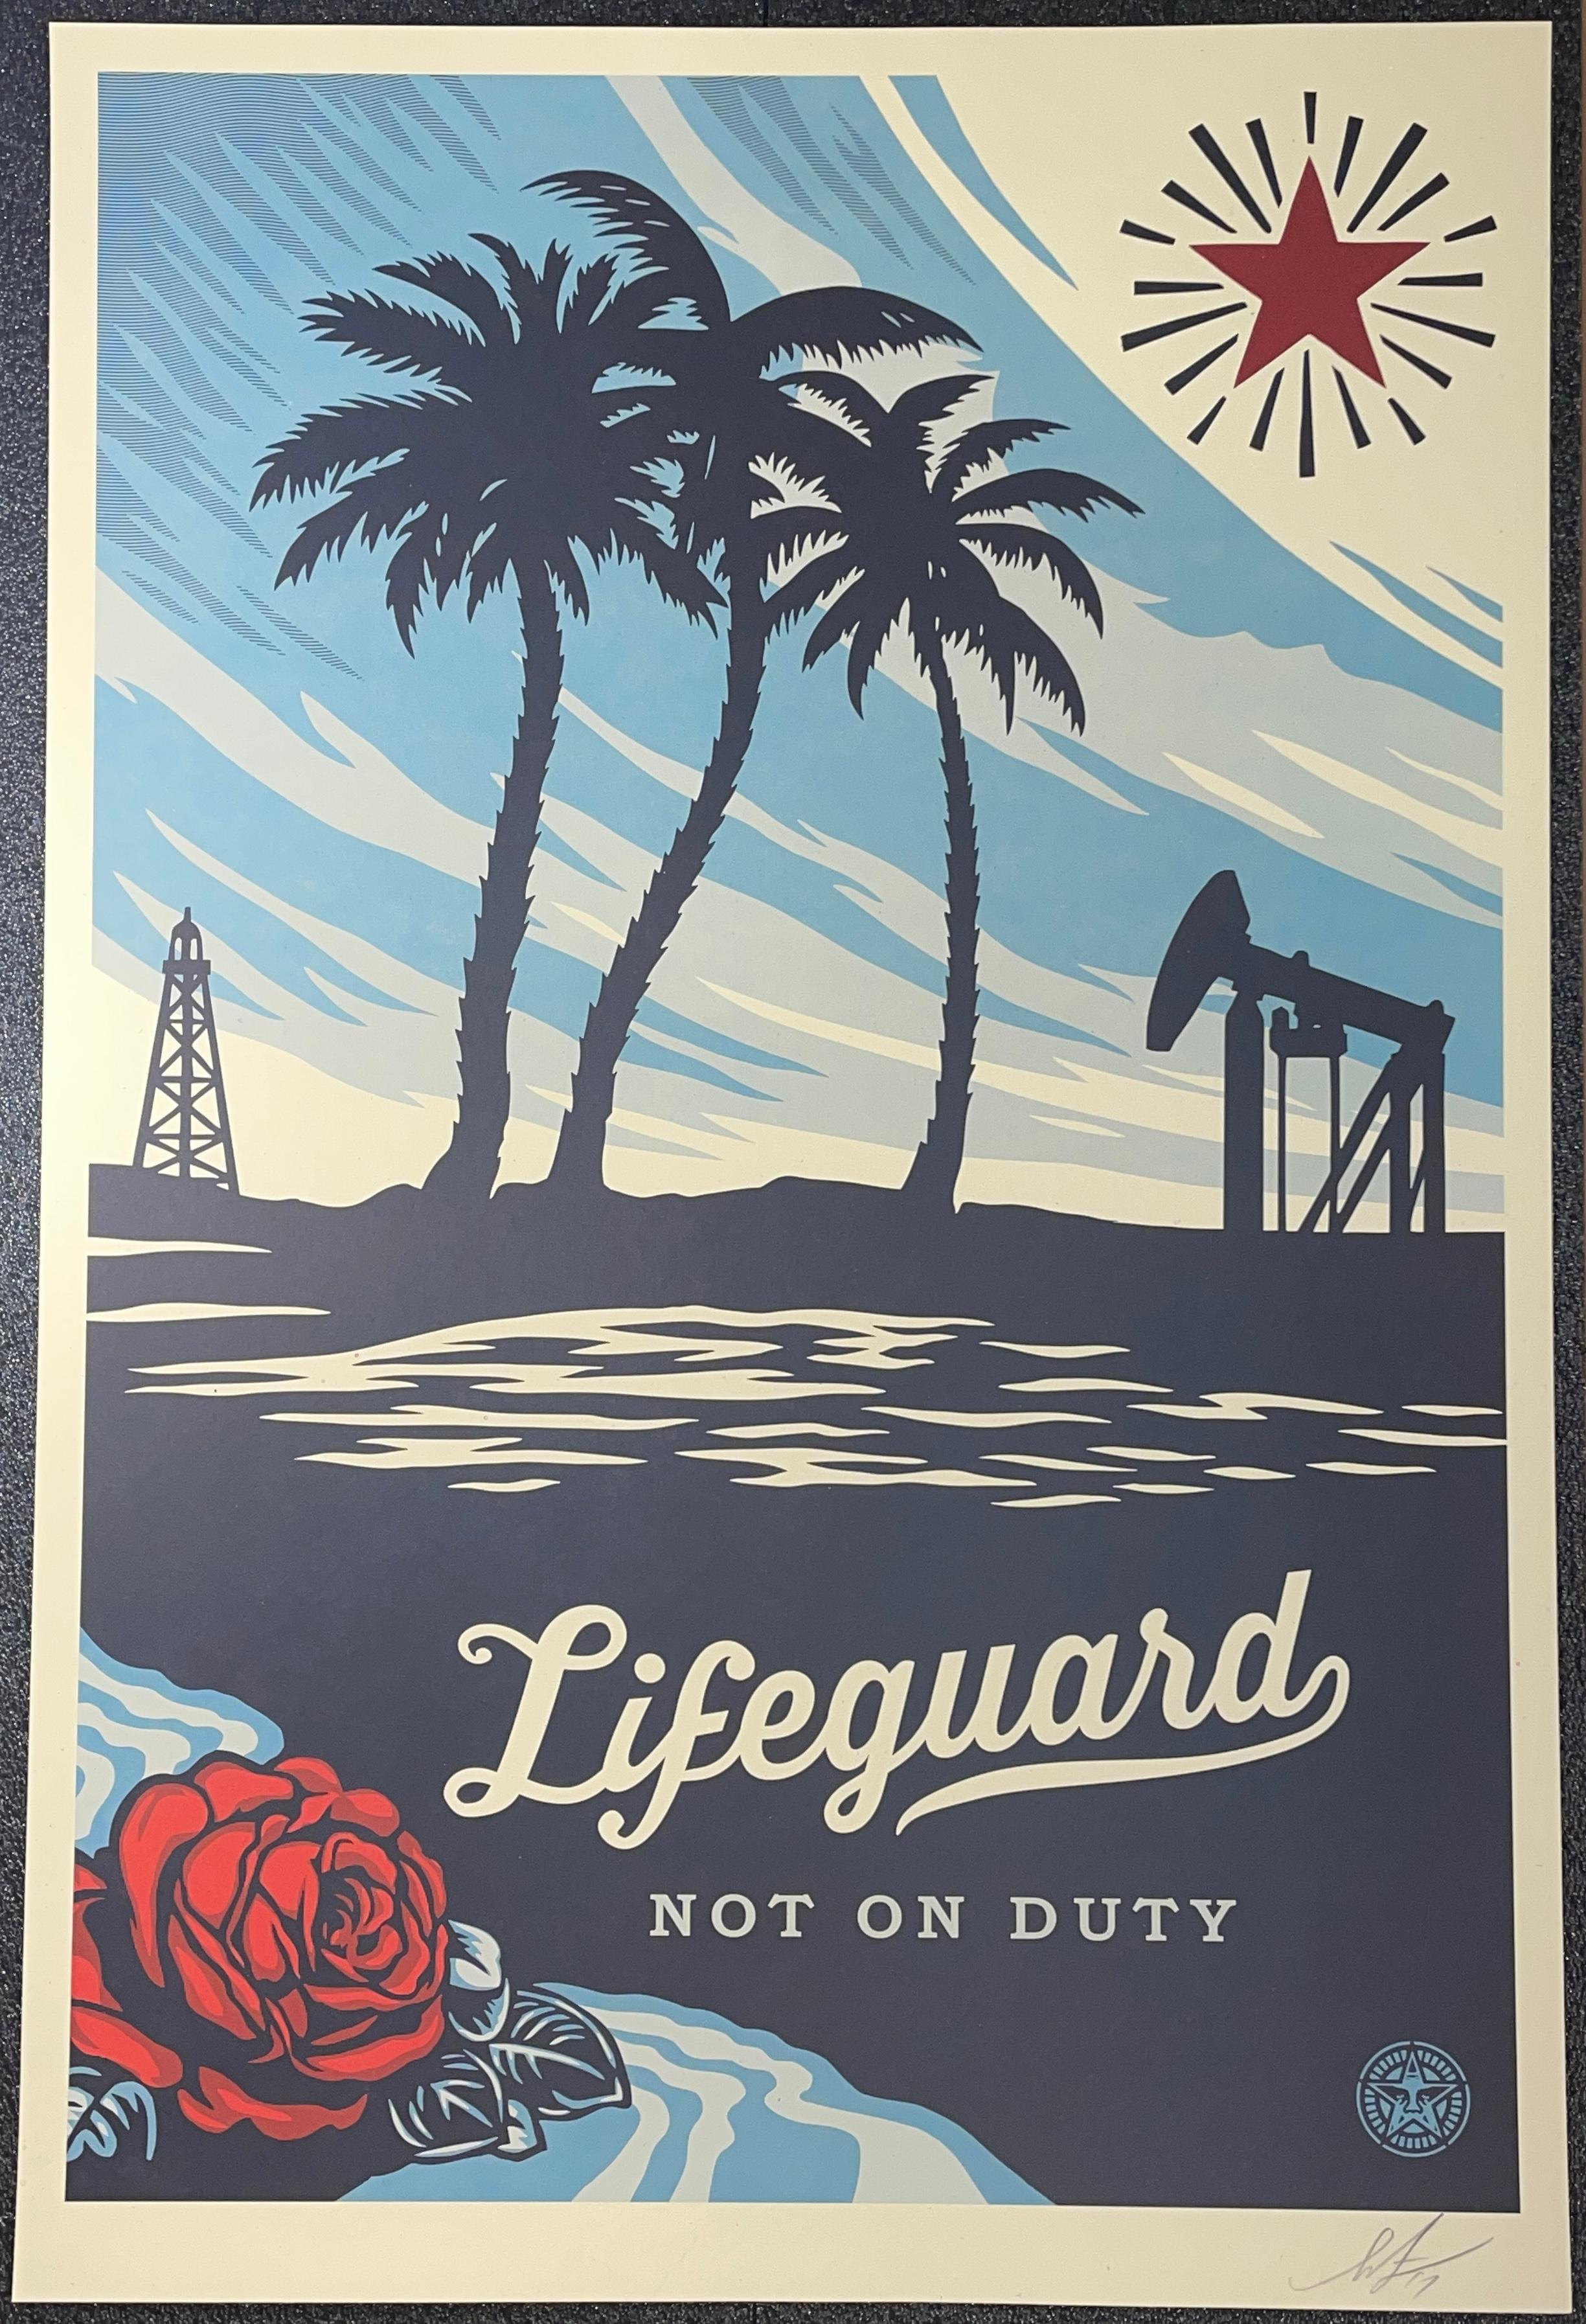 This "Lifeguard Not On Duty" print was inspired by some old photos I saw of oil derricks down on the beach at Playa Del Rey and Long Beach. There are still oil drilling platforms visible from the beach in Santa Barbara. Beyond just the environmental